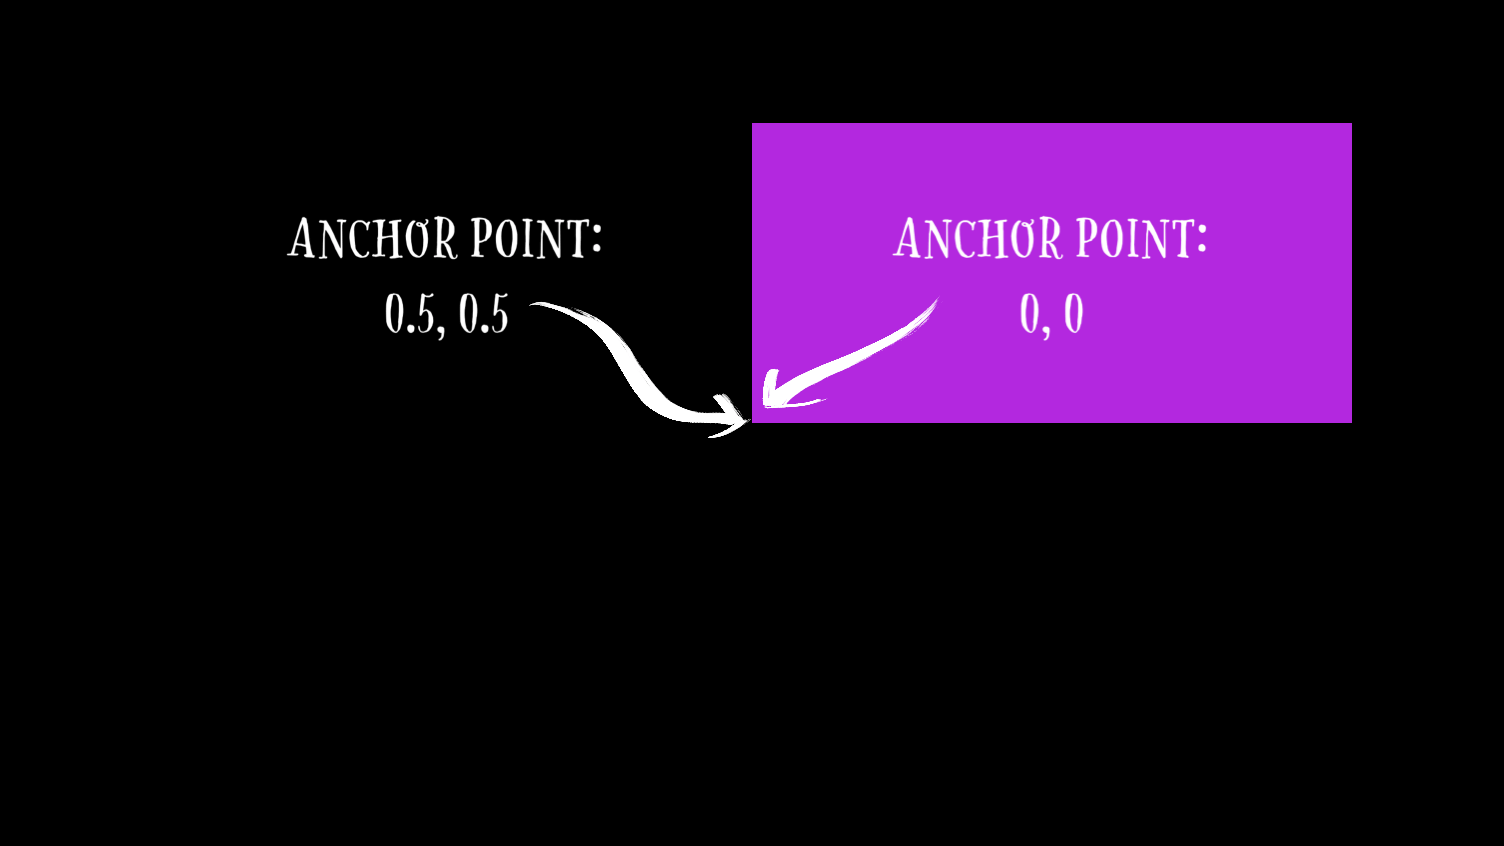 Image of a small purple rectangle on a large black rectangle. The bottom left corner of the purple rectangle is aligned with the centre of the image. There are two captions, one in the black rectangle that says Anchor Point: 0.5, 0.5 and one on the purple rectangle that says Anchor Point: 0, 0